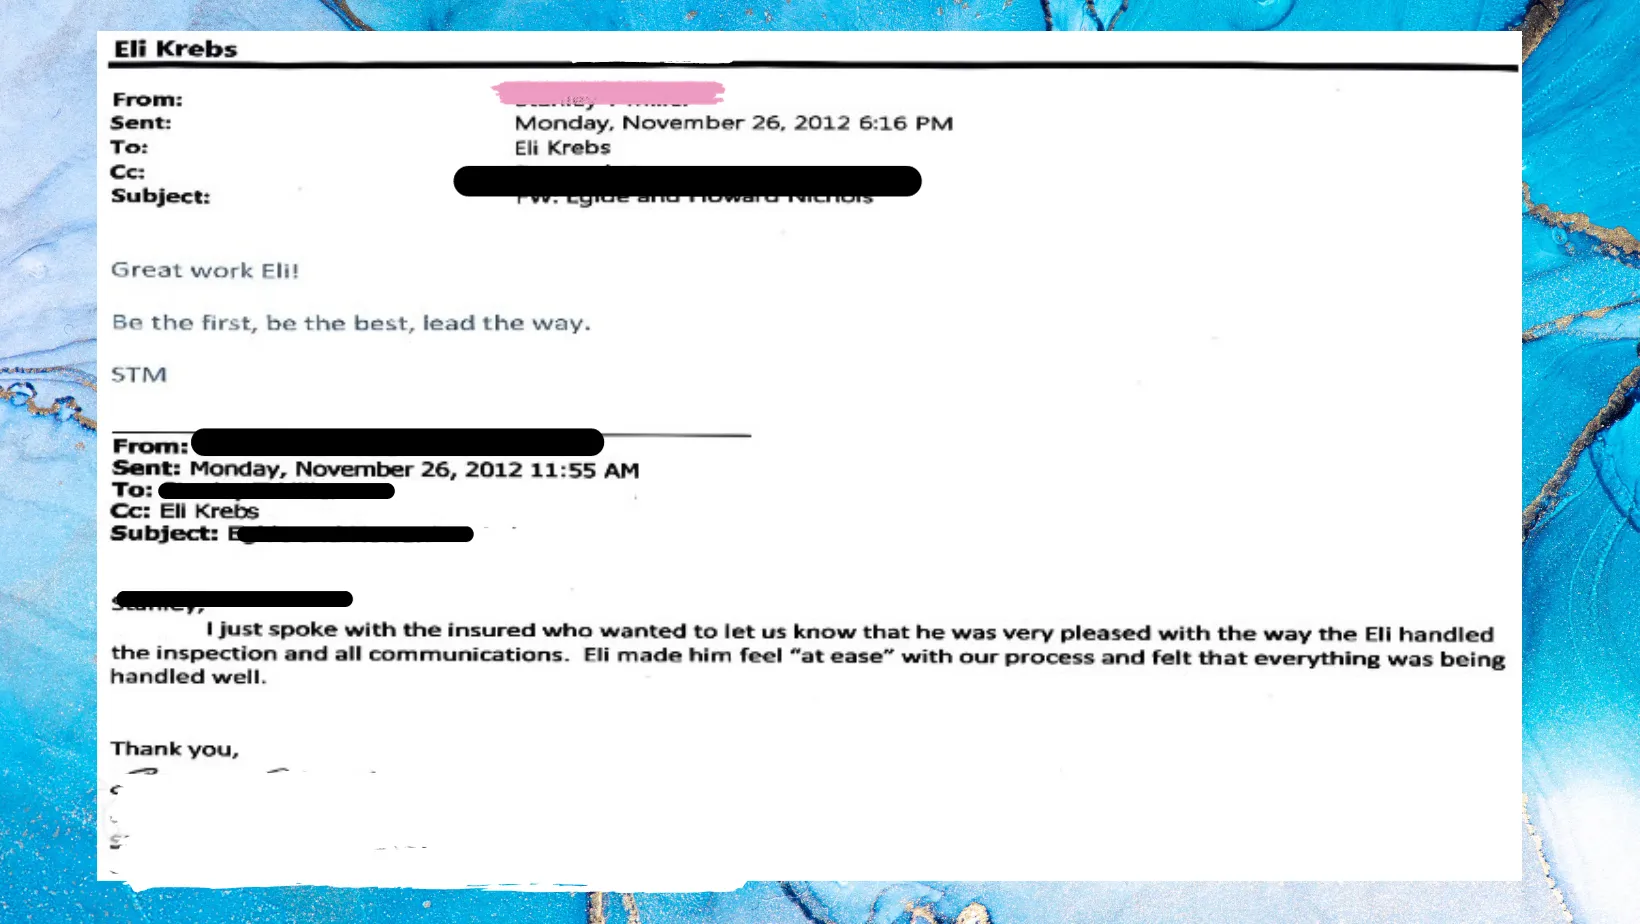 2nd letter from insured to management